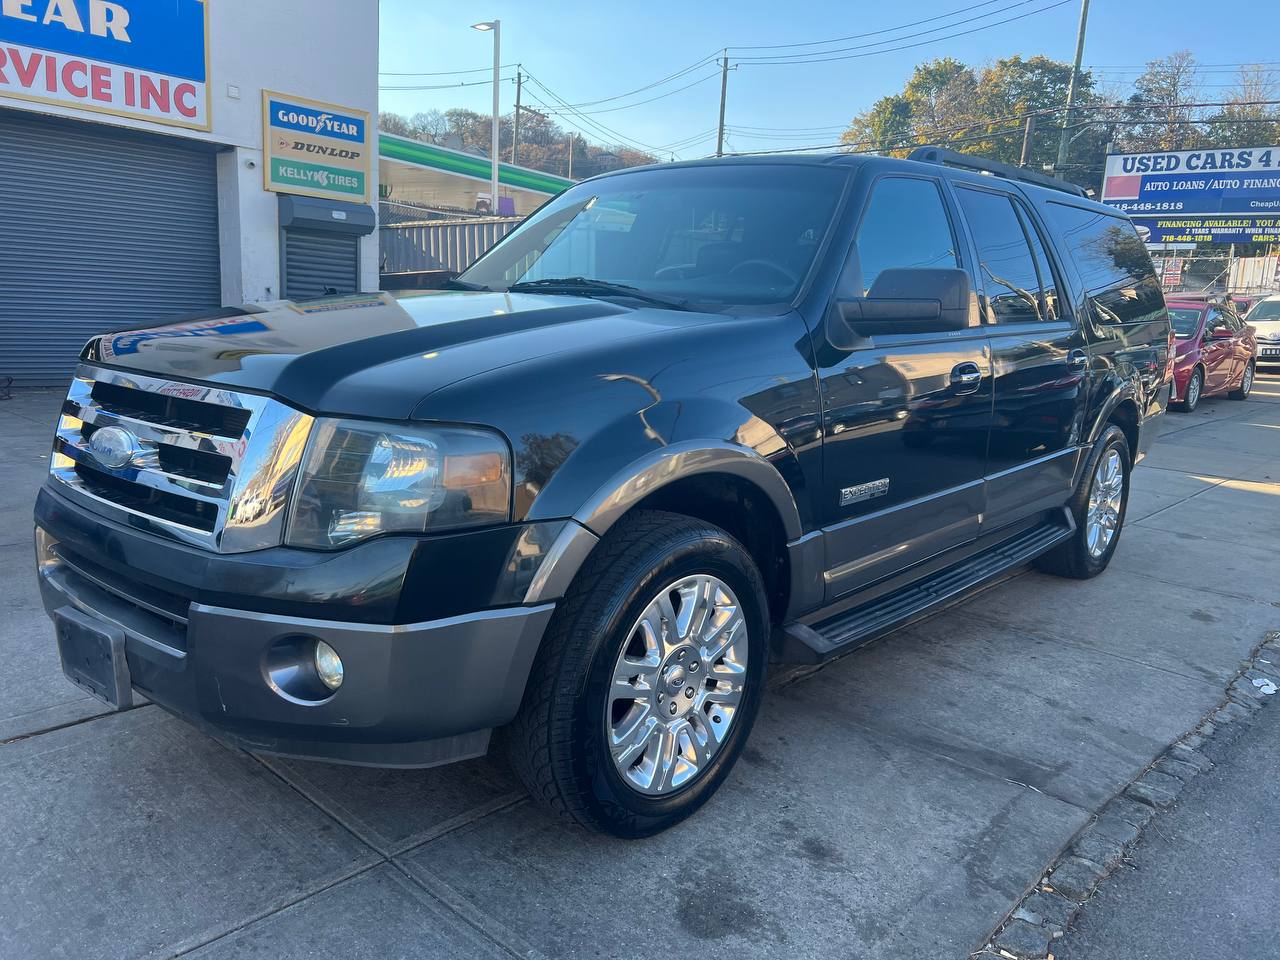 Used Car - 2007 Ford Expedition EL XLT for Sale in Staten Island, NY